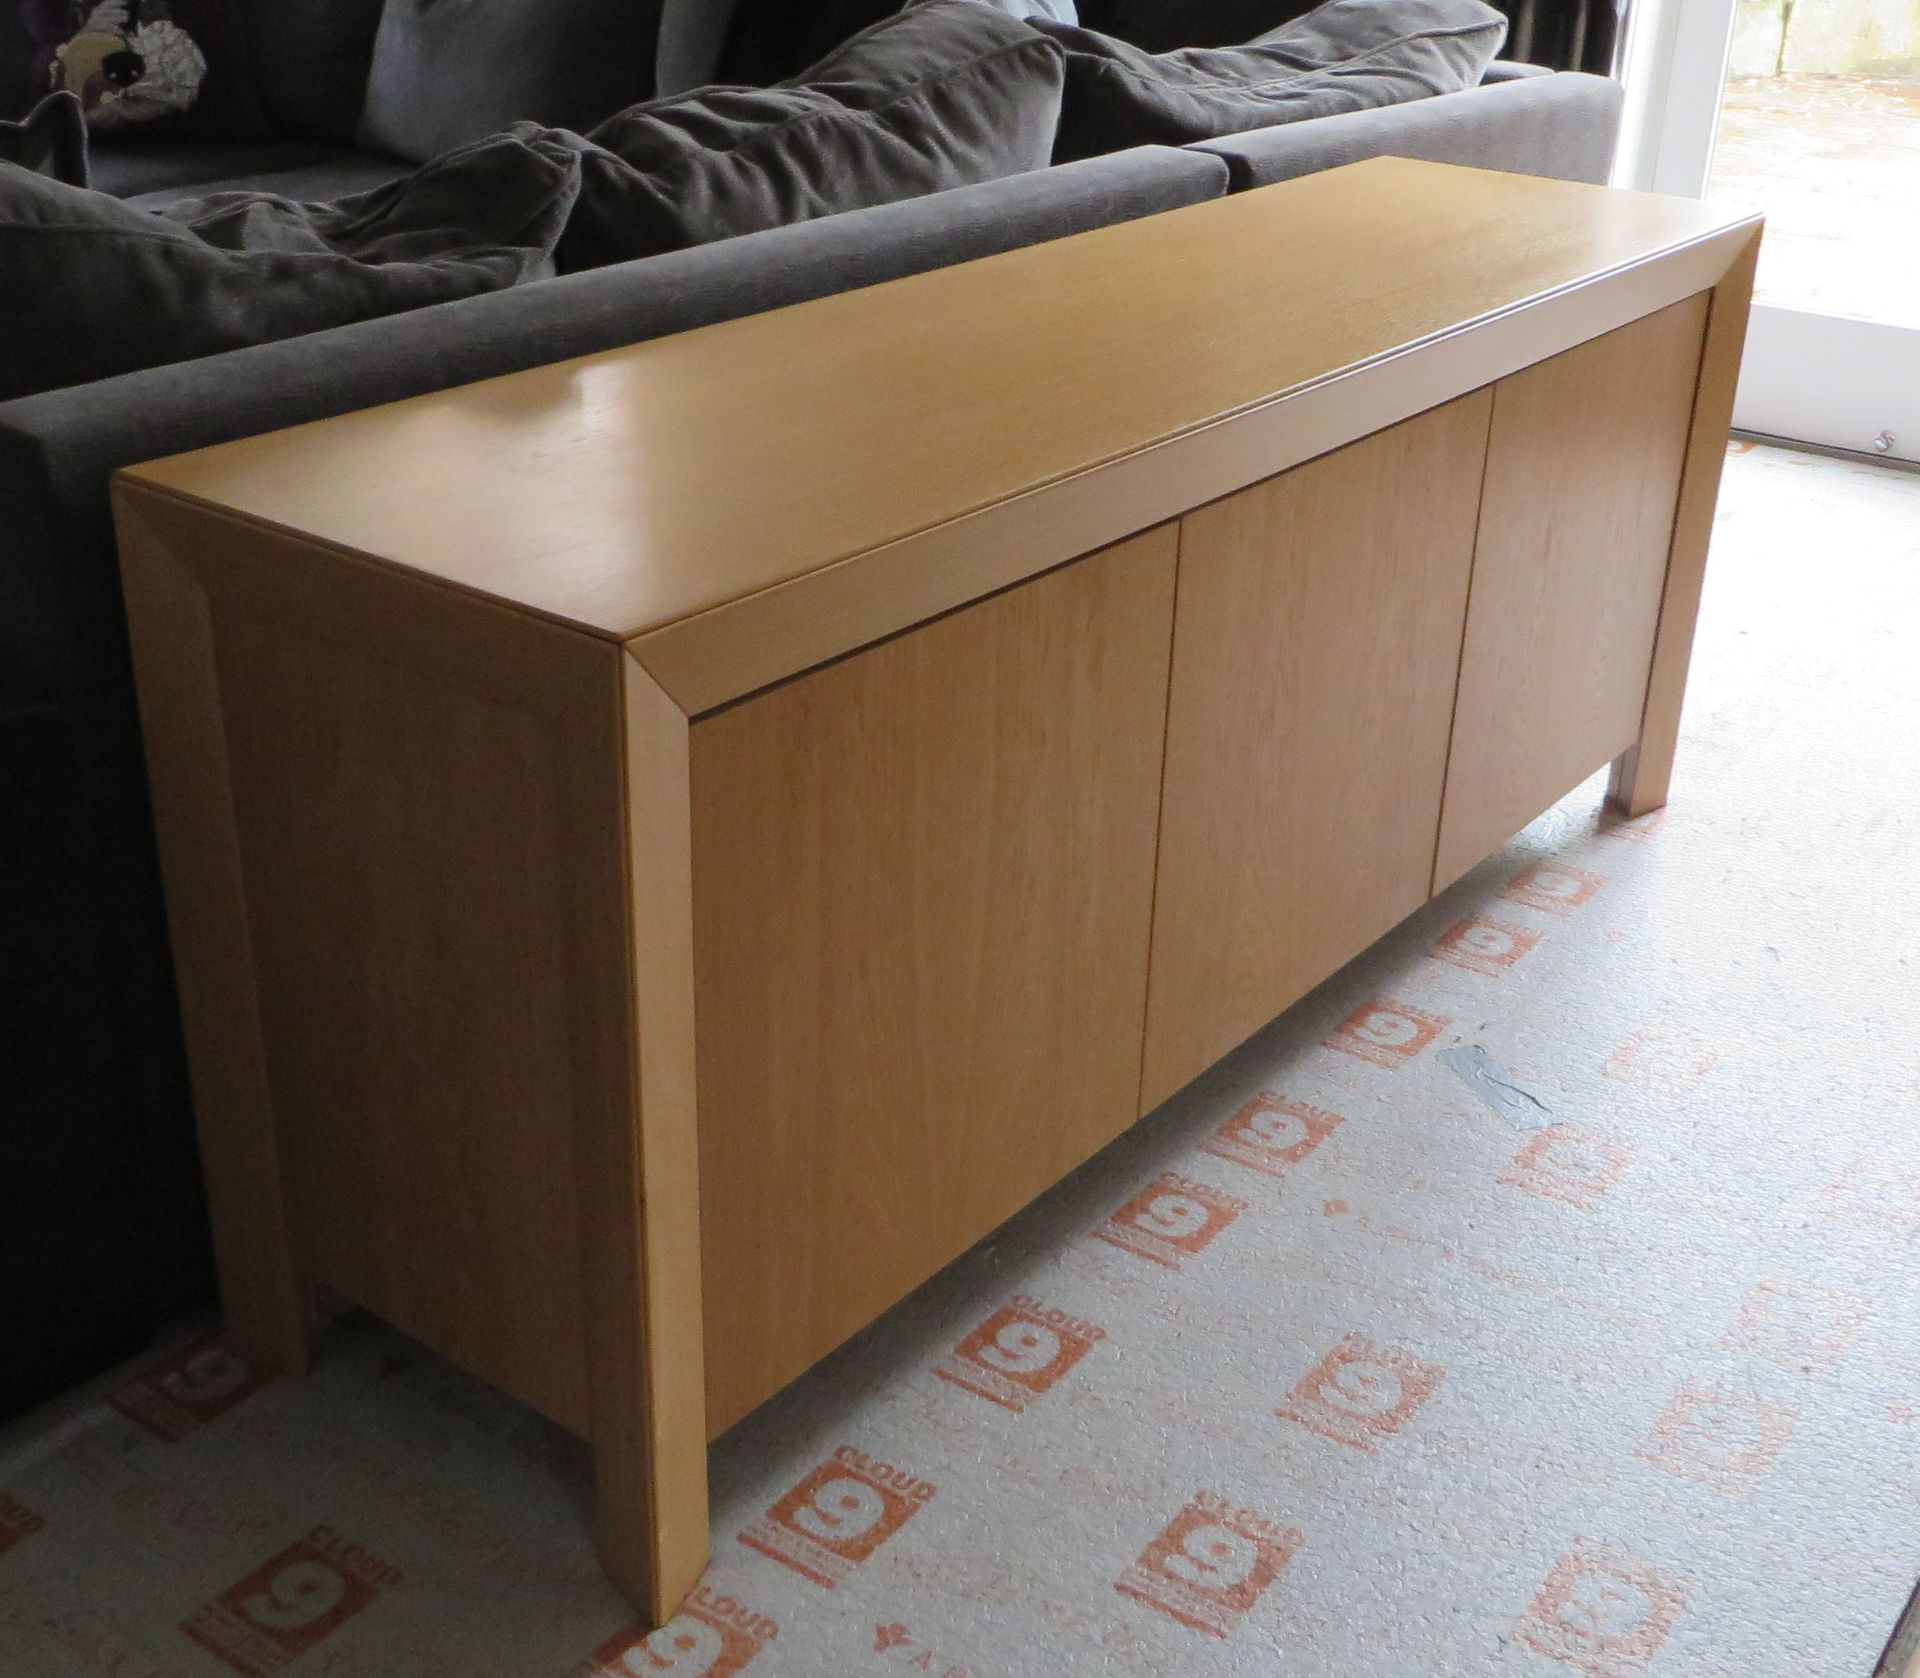 1 x Skovby Oak Sideboard with Push-To-Open Doors - Excellent Condition - CL175 - NO VAT - Image 7 of 8